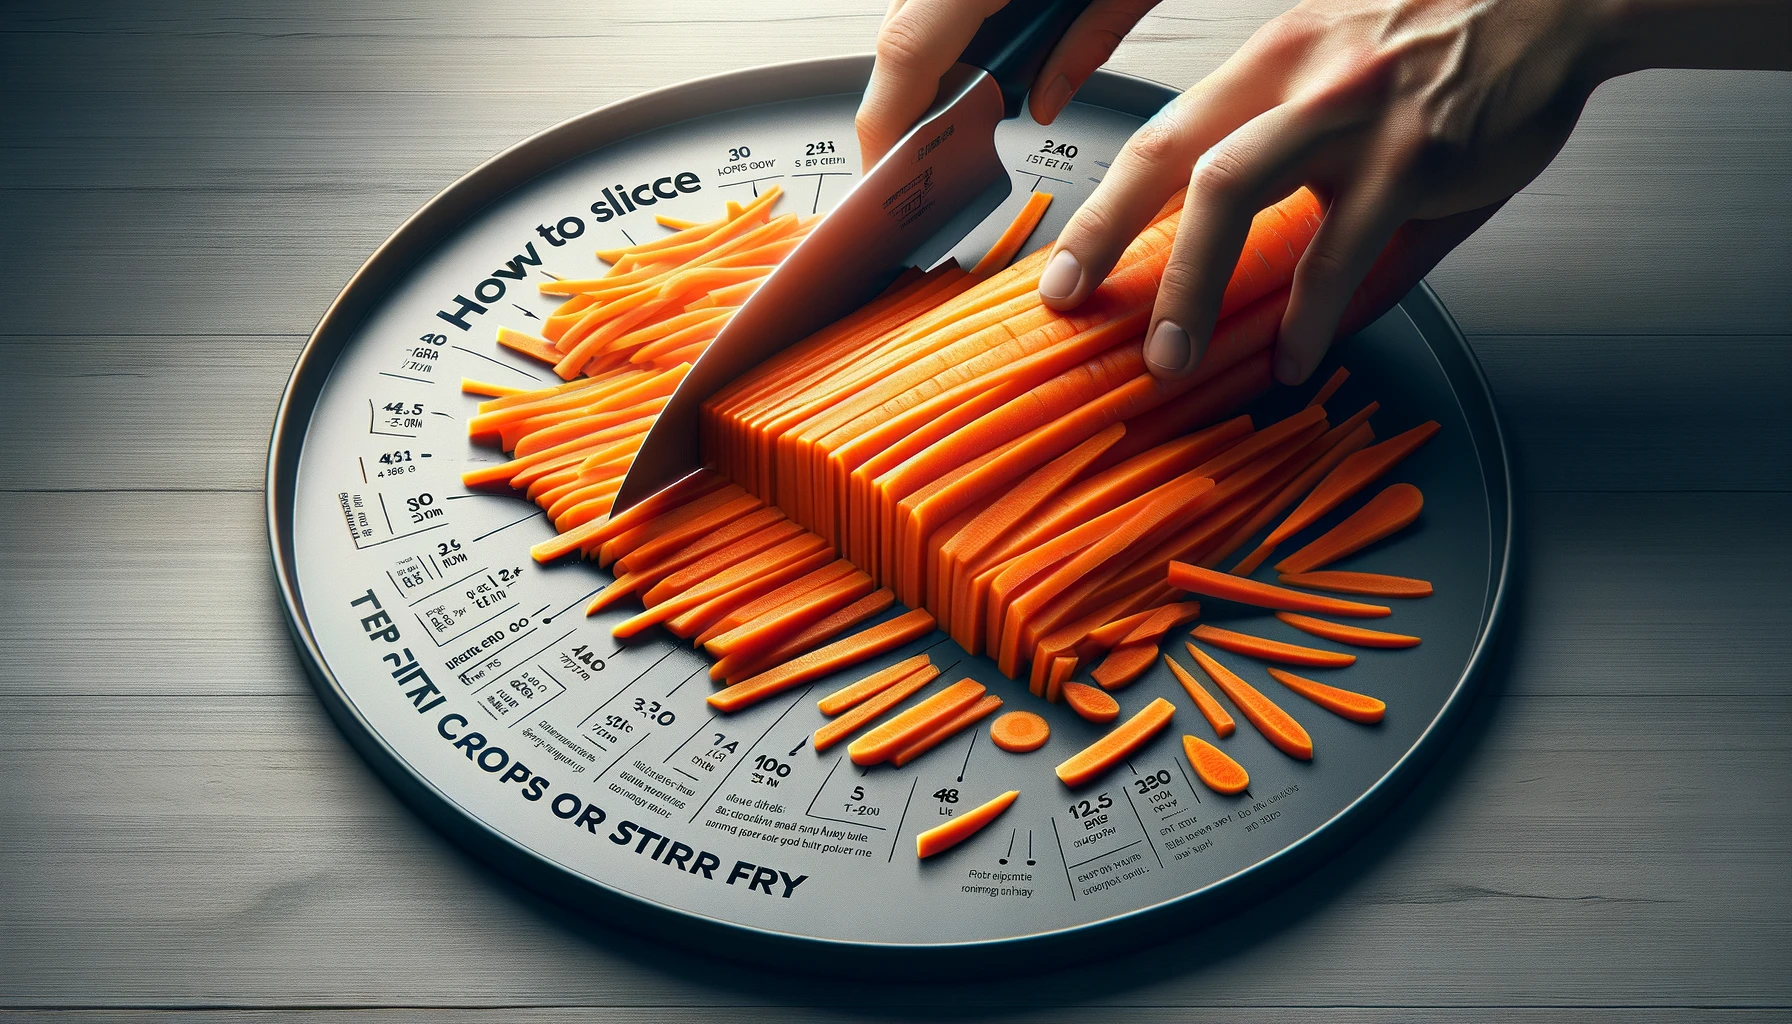 How to Slice Carrots for Stir Fry: Cooking Guide